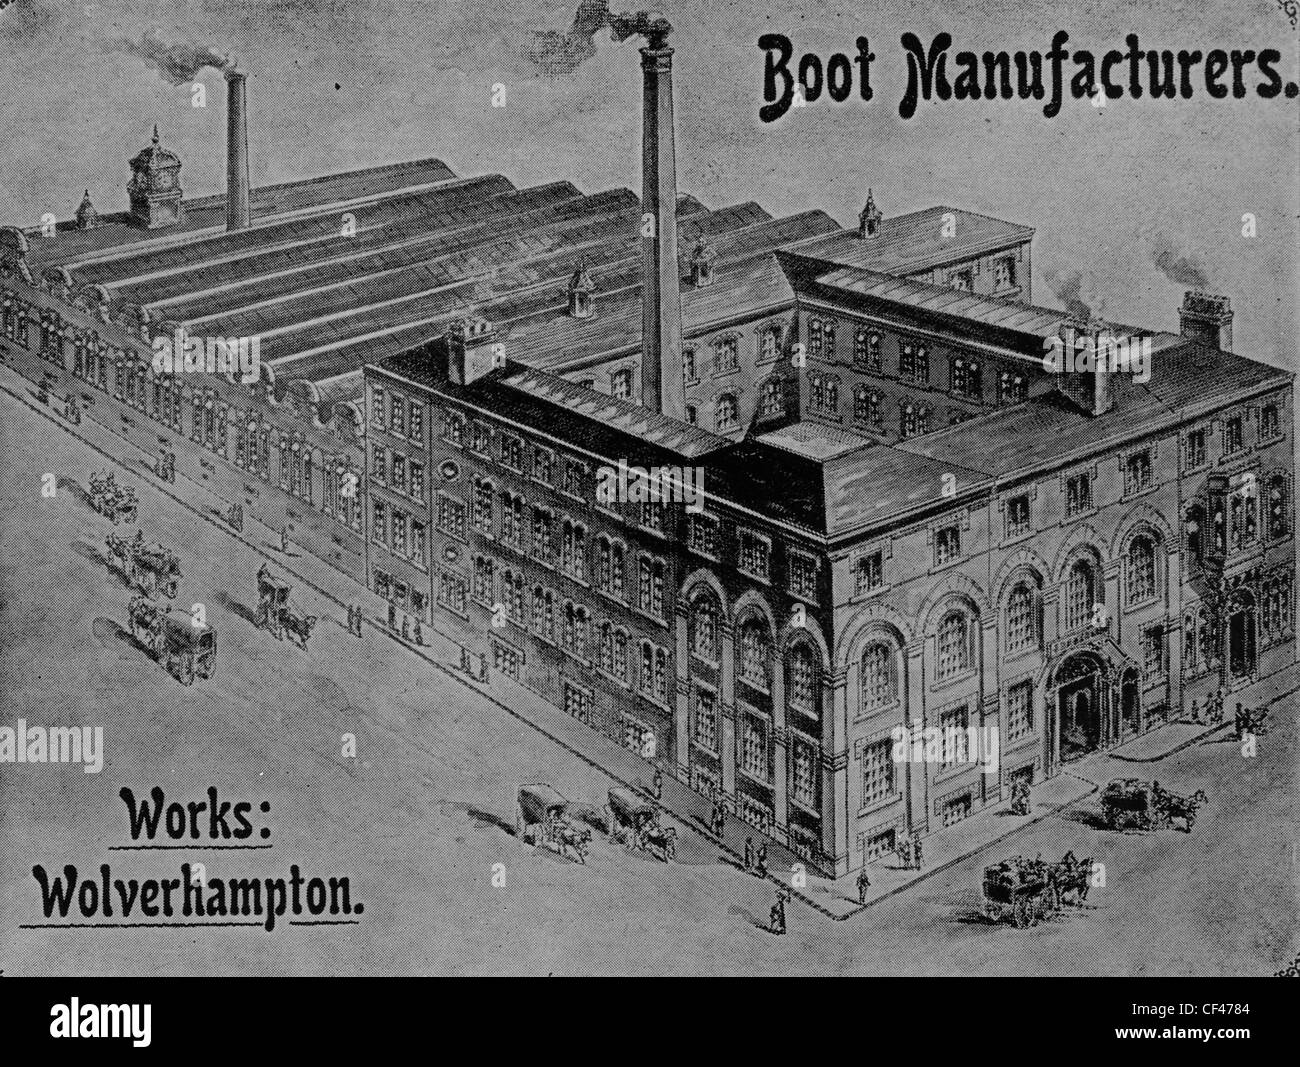 boot manufacturers